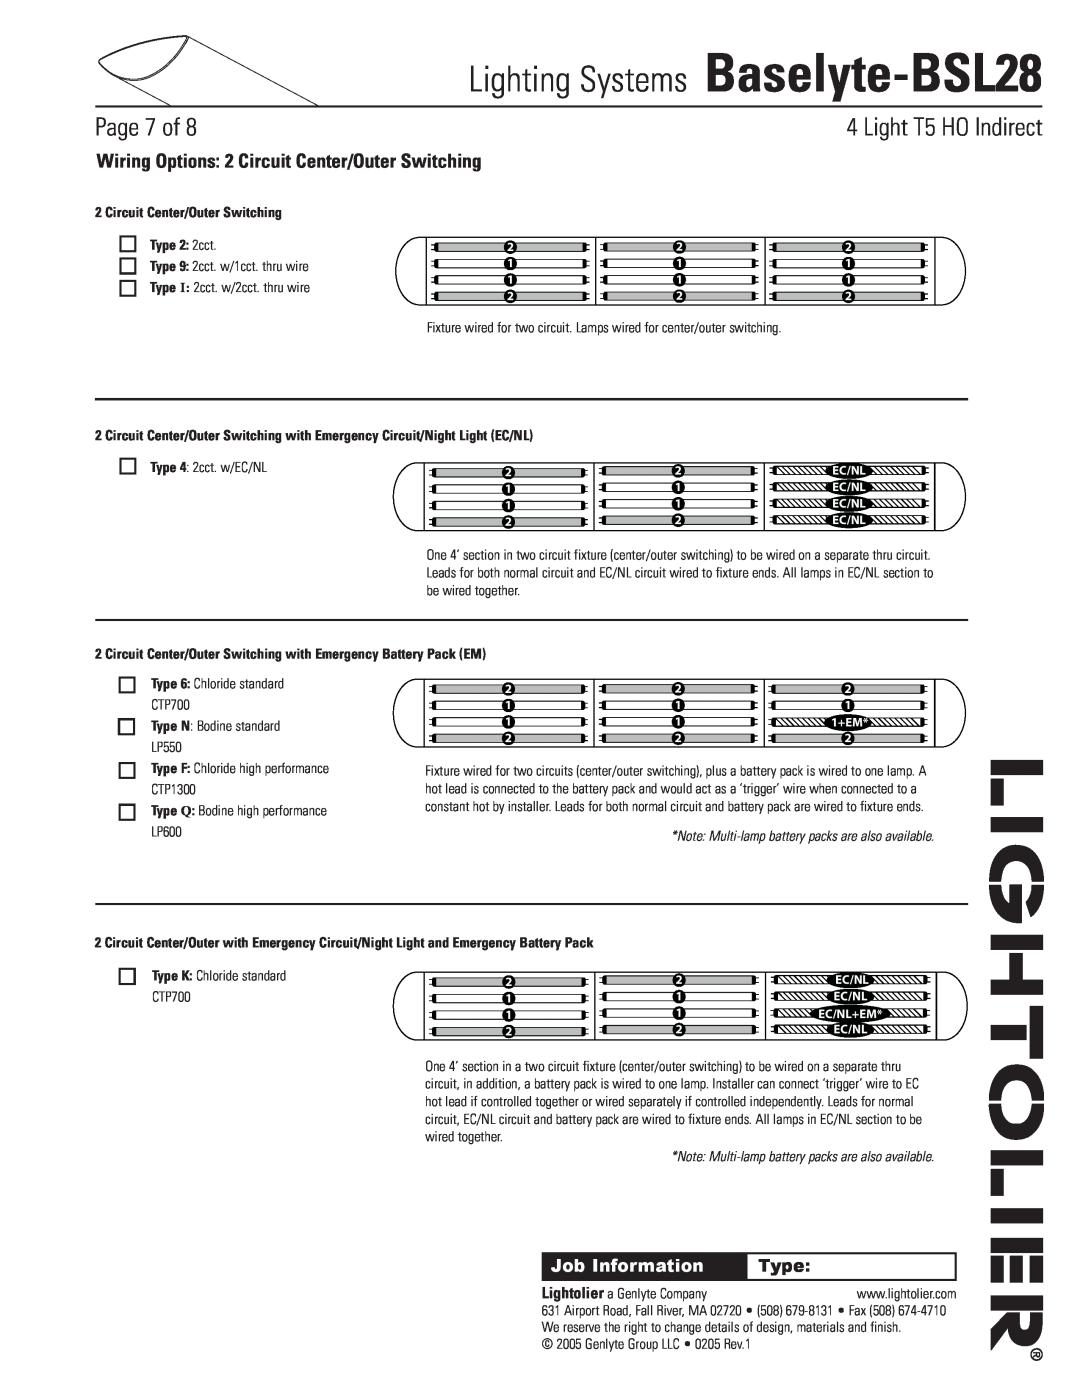 Lightolier Baselyte-BSL28 Wiring Options 2 Circuit Center/Outer Switching, Circuit Center/Outer Switching Type 2 2cct 